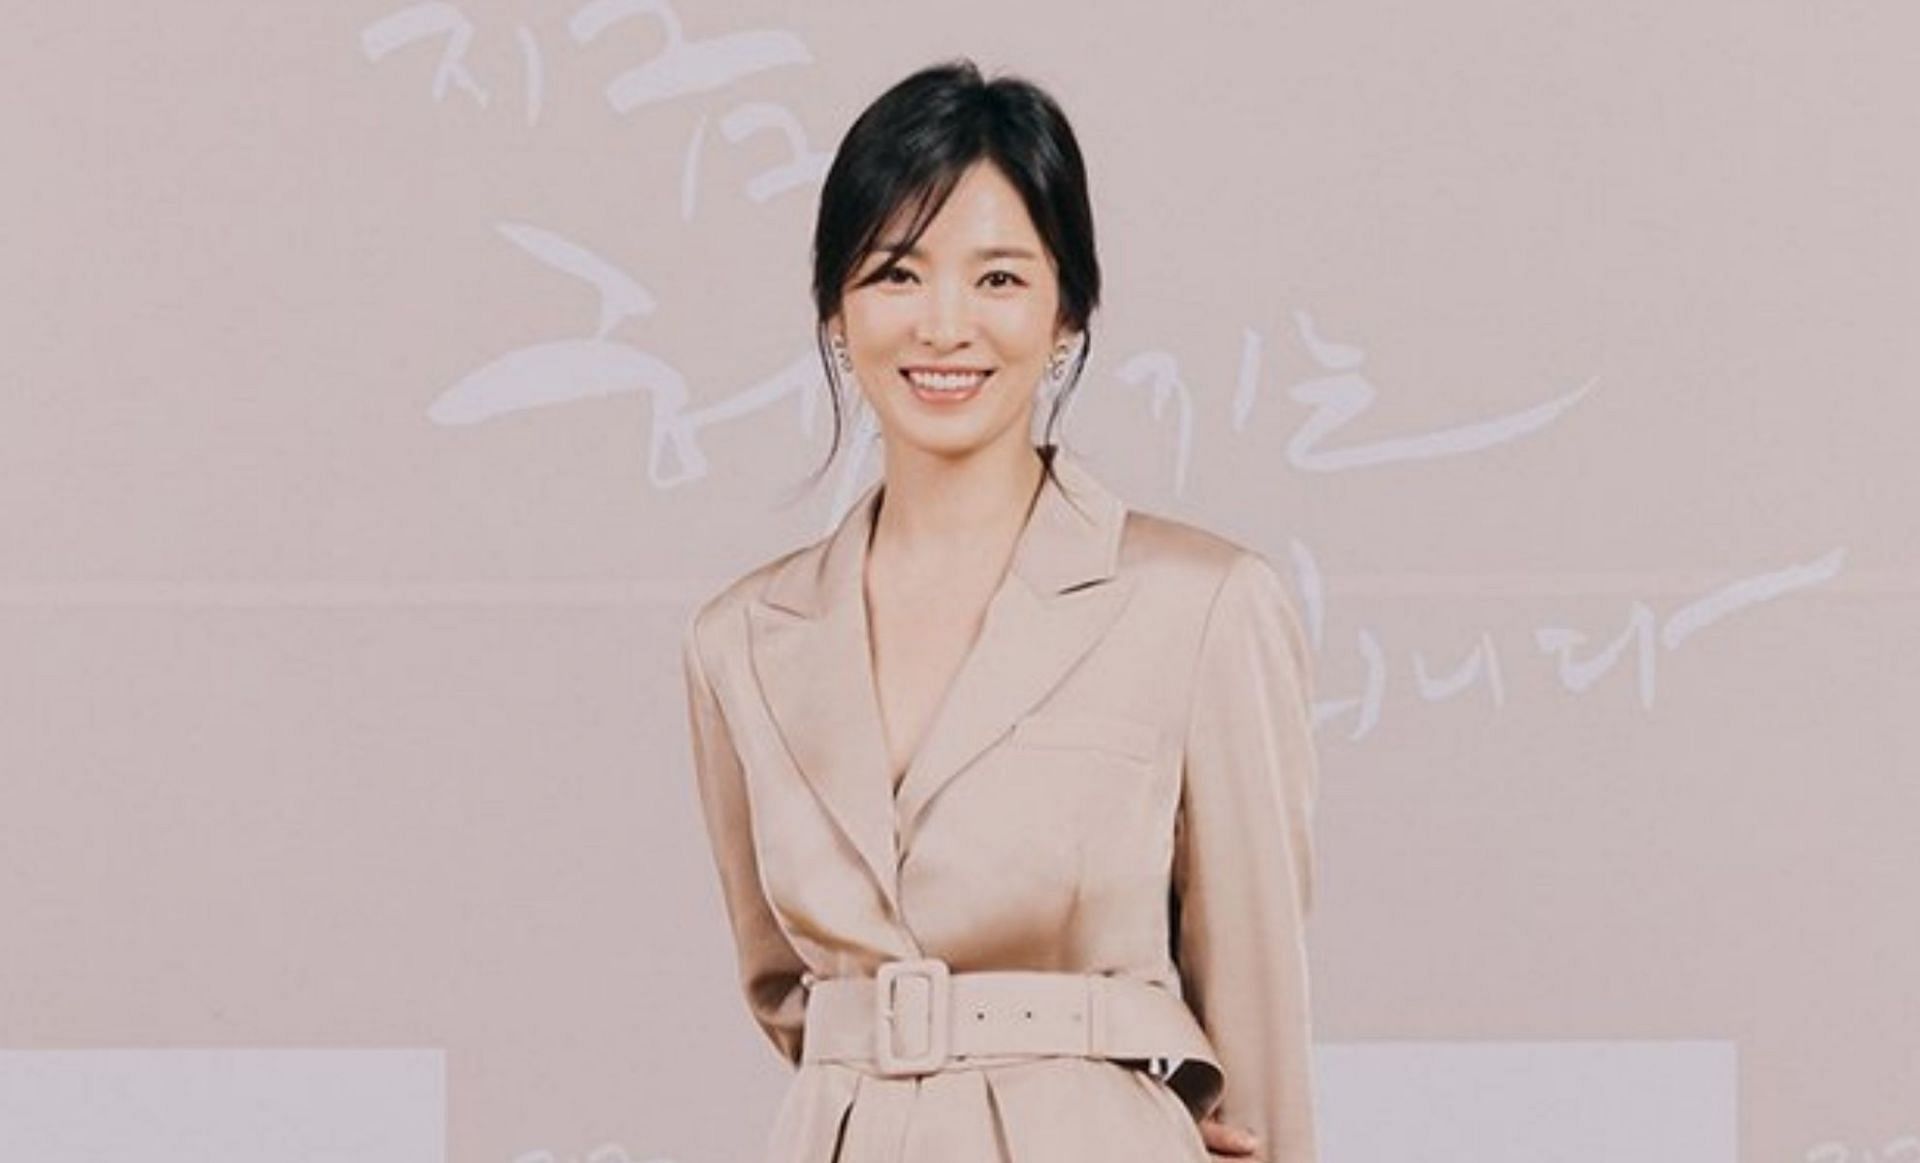 Song Hye Kyo at &#039;Now, We&#039;re Breaking Up&#039; press conference (Image via @nowwearebreakingup_official/Instagram)